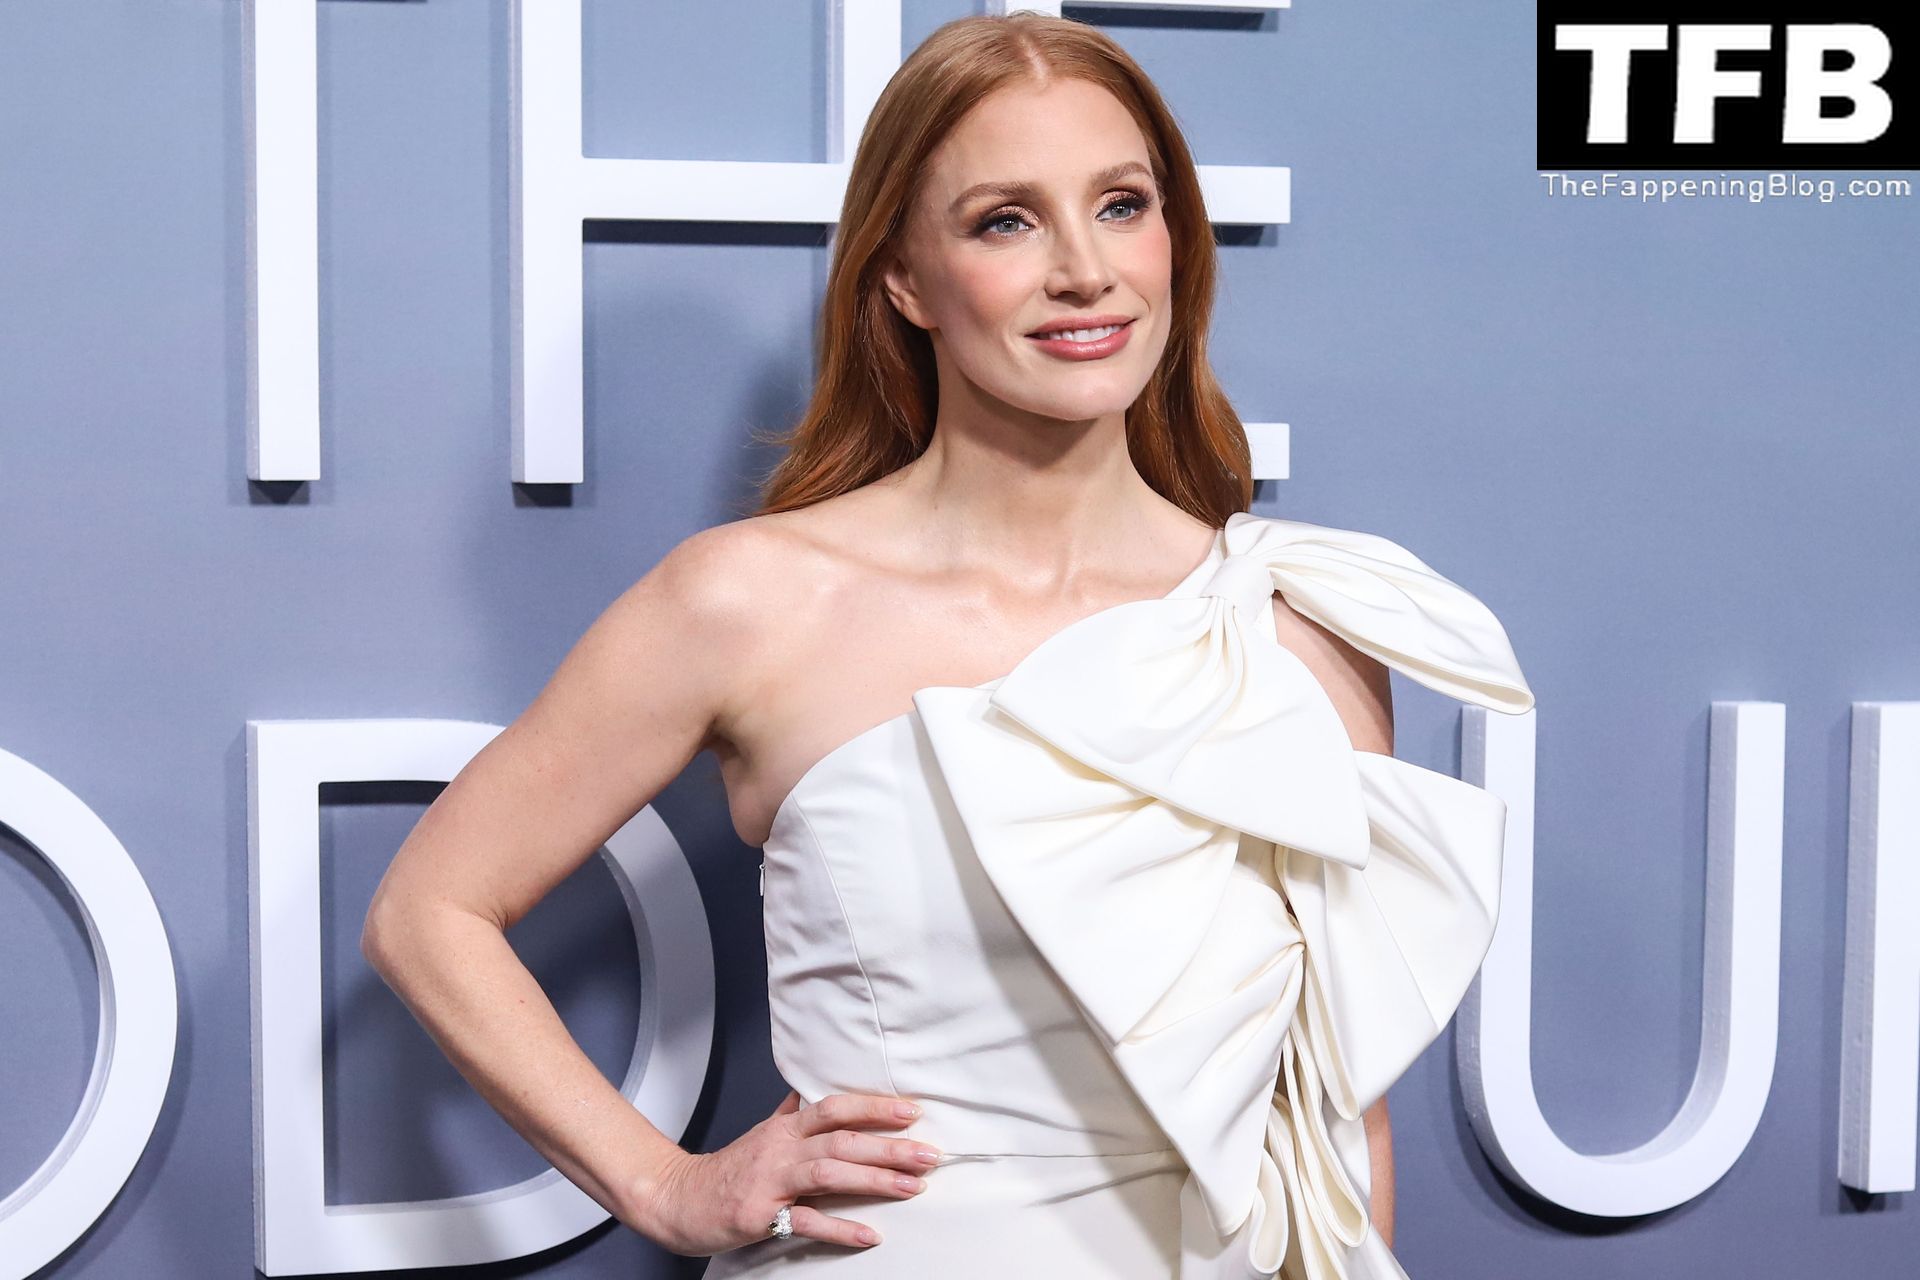 Jessica Chastain Sexy The Fappening Blog 149 1 - Jessica Chastain Flaunts Her Sexy Legs at the Netflix’s “Good Nurse” Premiere in New York (154 Photos)